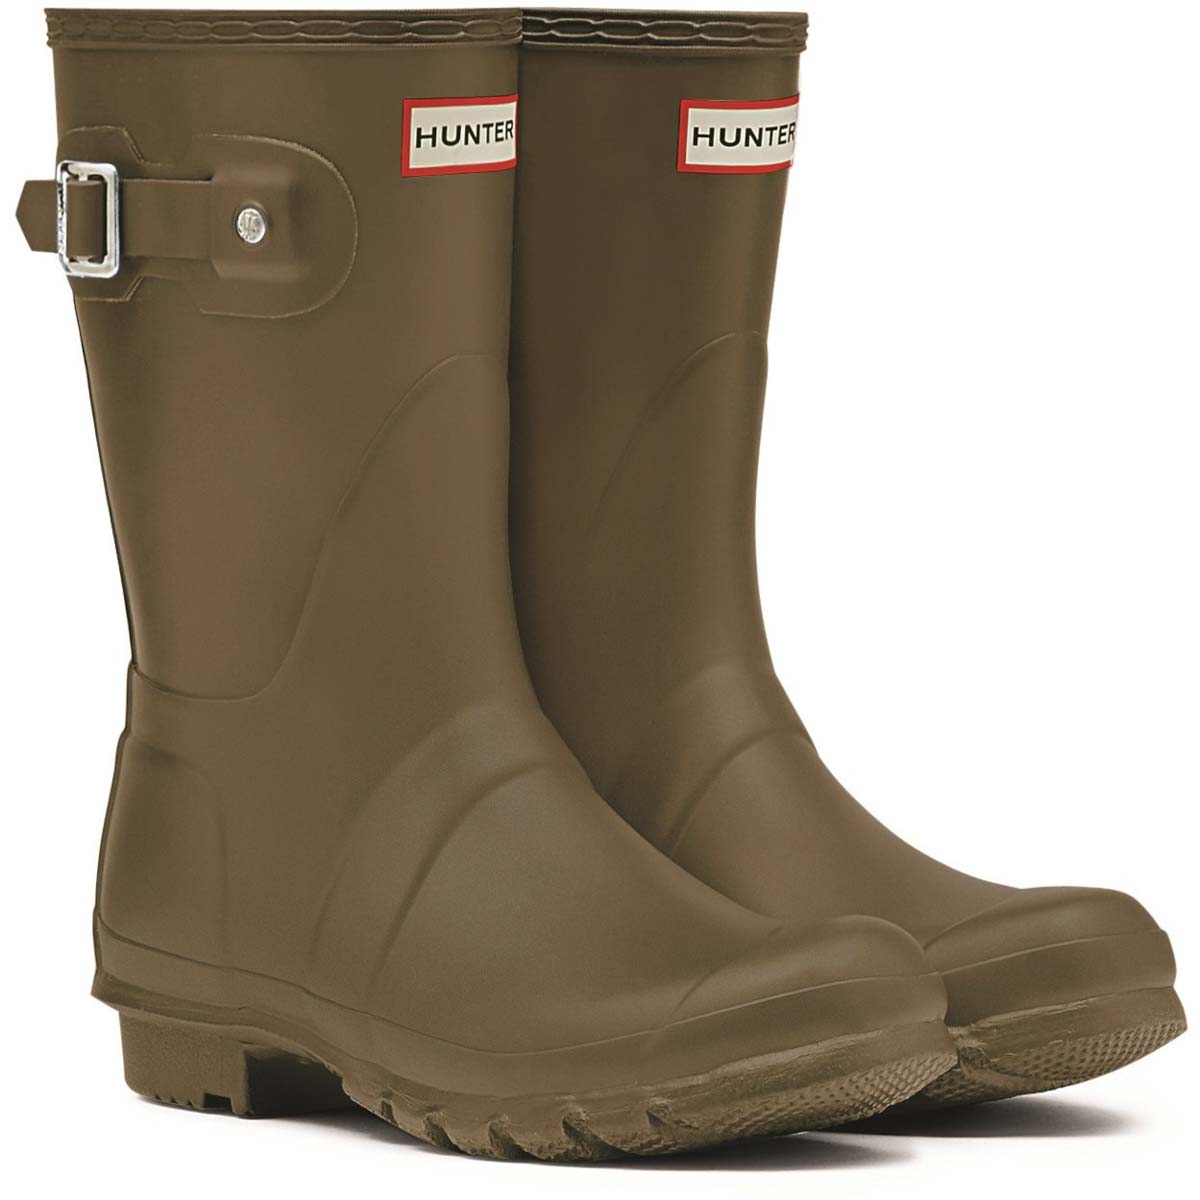 Hunter Original Short Olive Green Womens Wellingtons WFS1000RMA in a Plain Man-made in Size 3